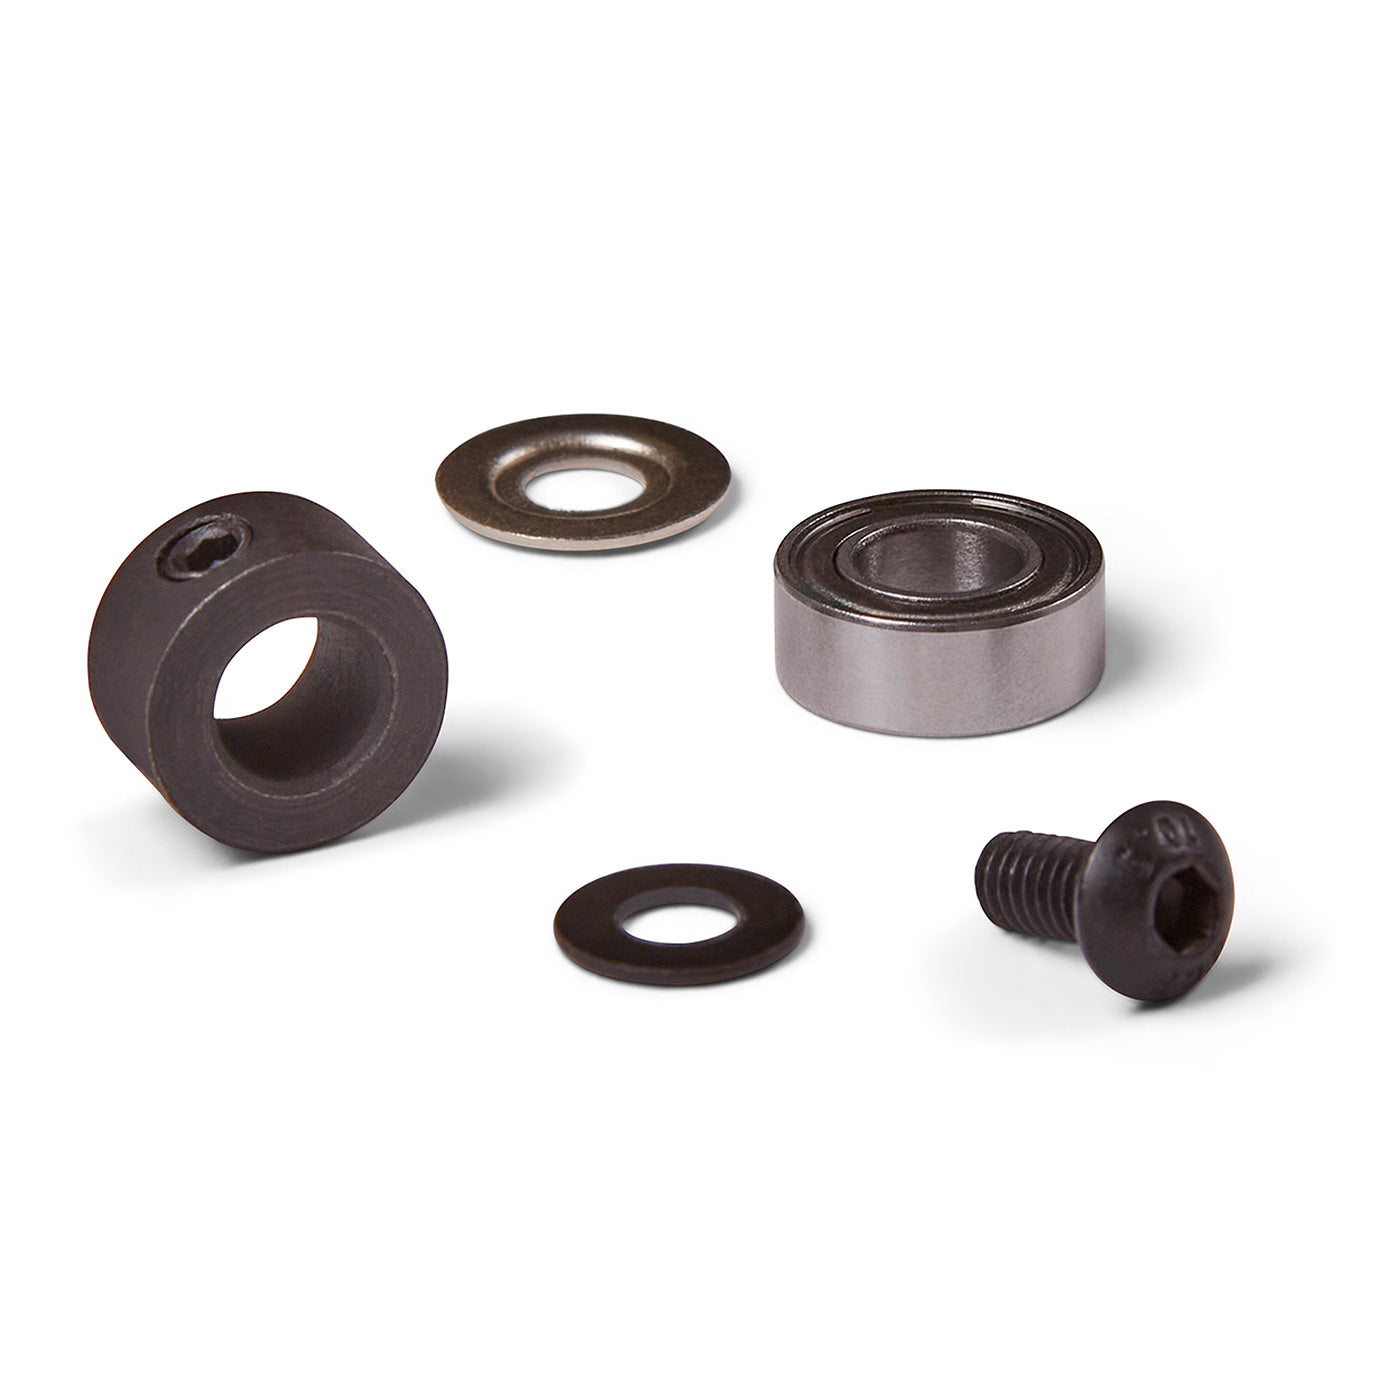 Bearing Kit for R5522, R5700, R5701 and R5712  